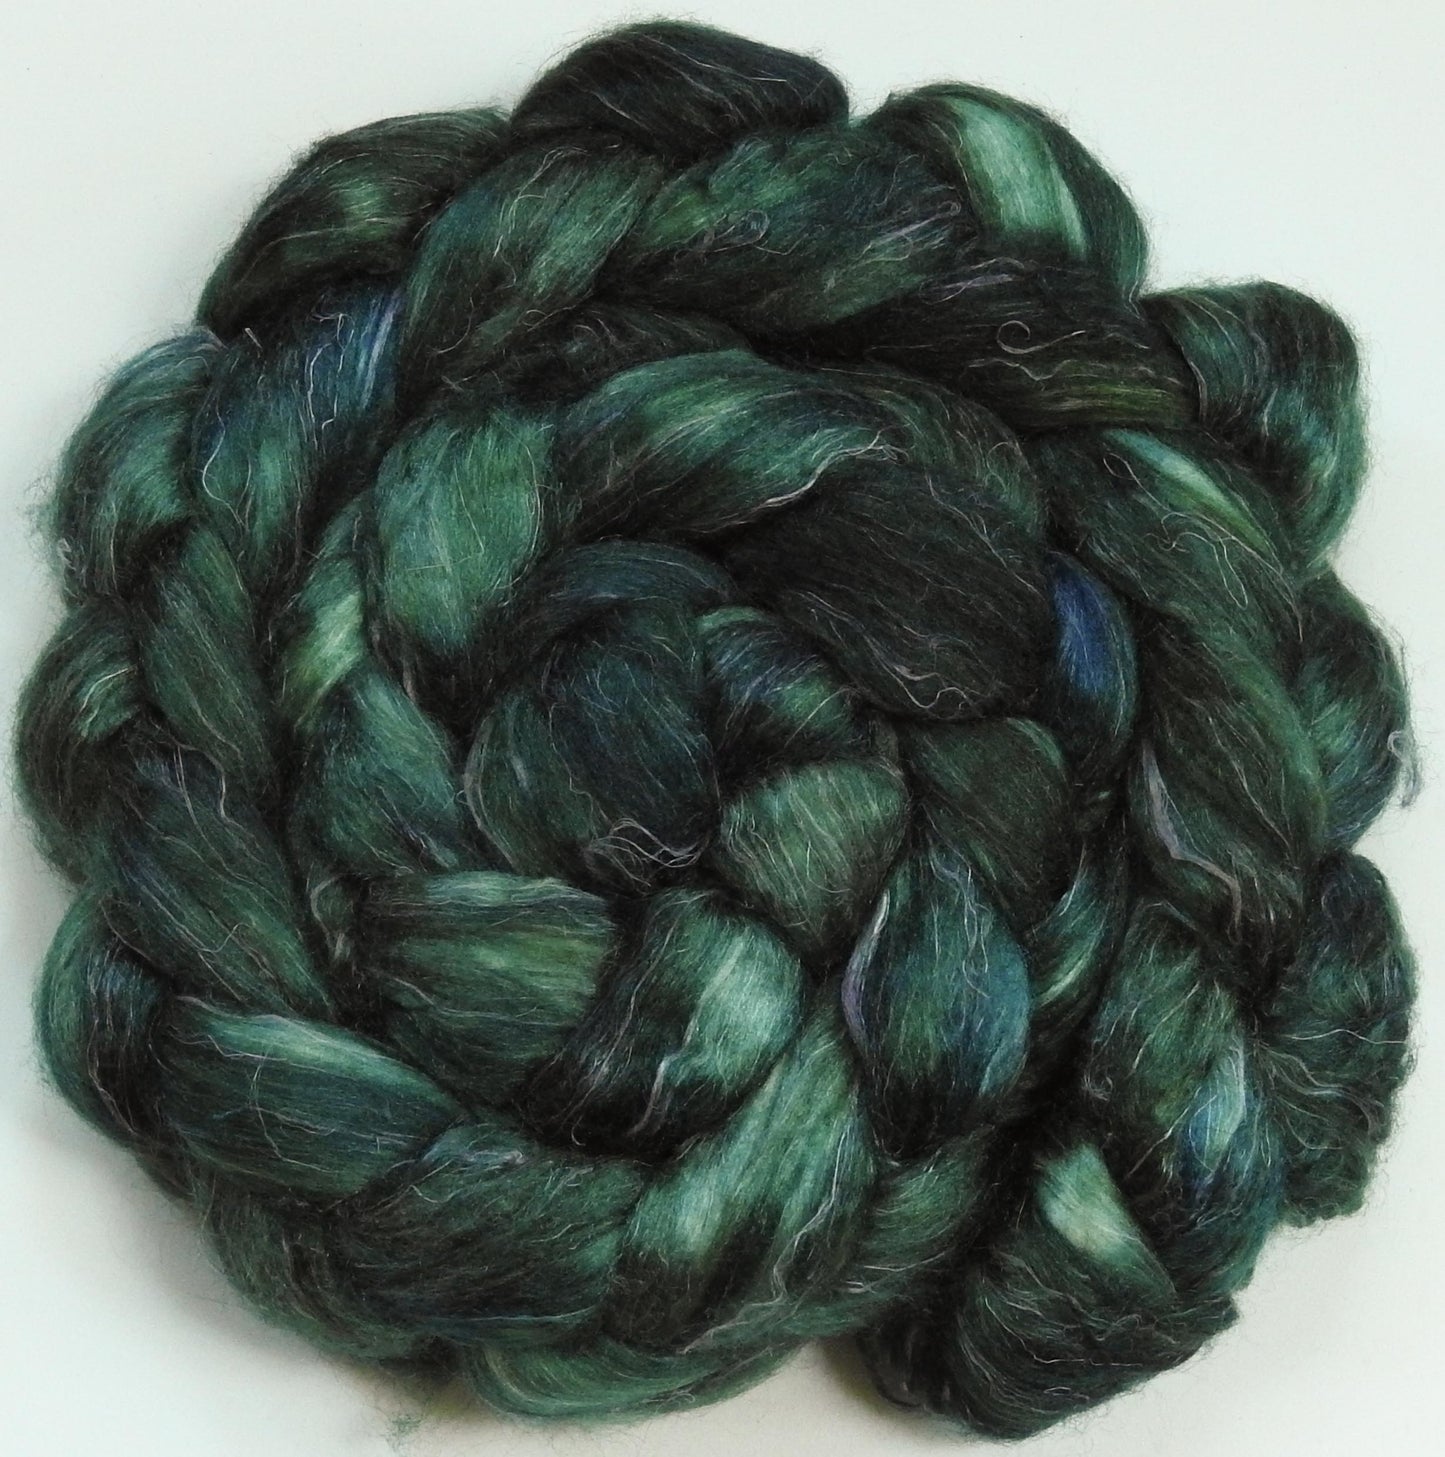 Courgette (6.1 oz) - Tussah Silk / flax roving (65/35)